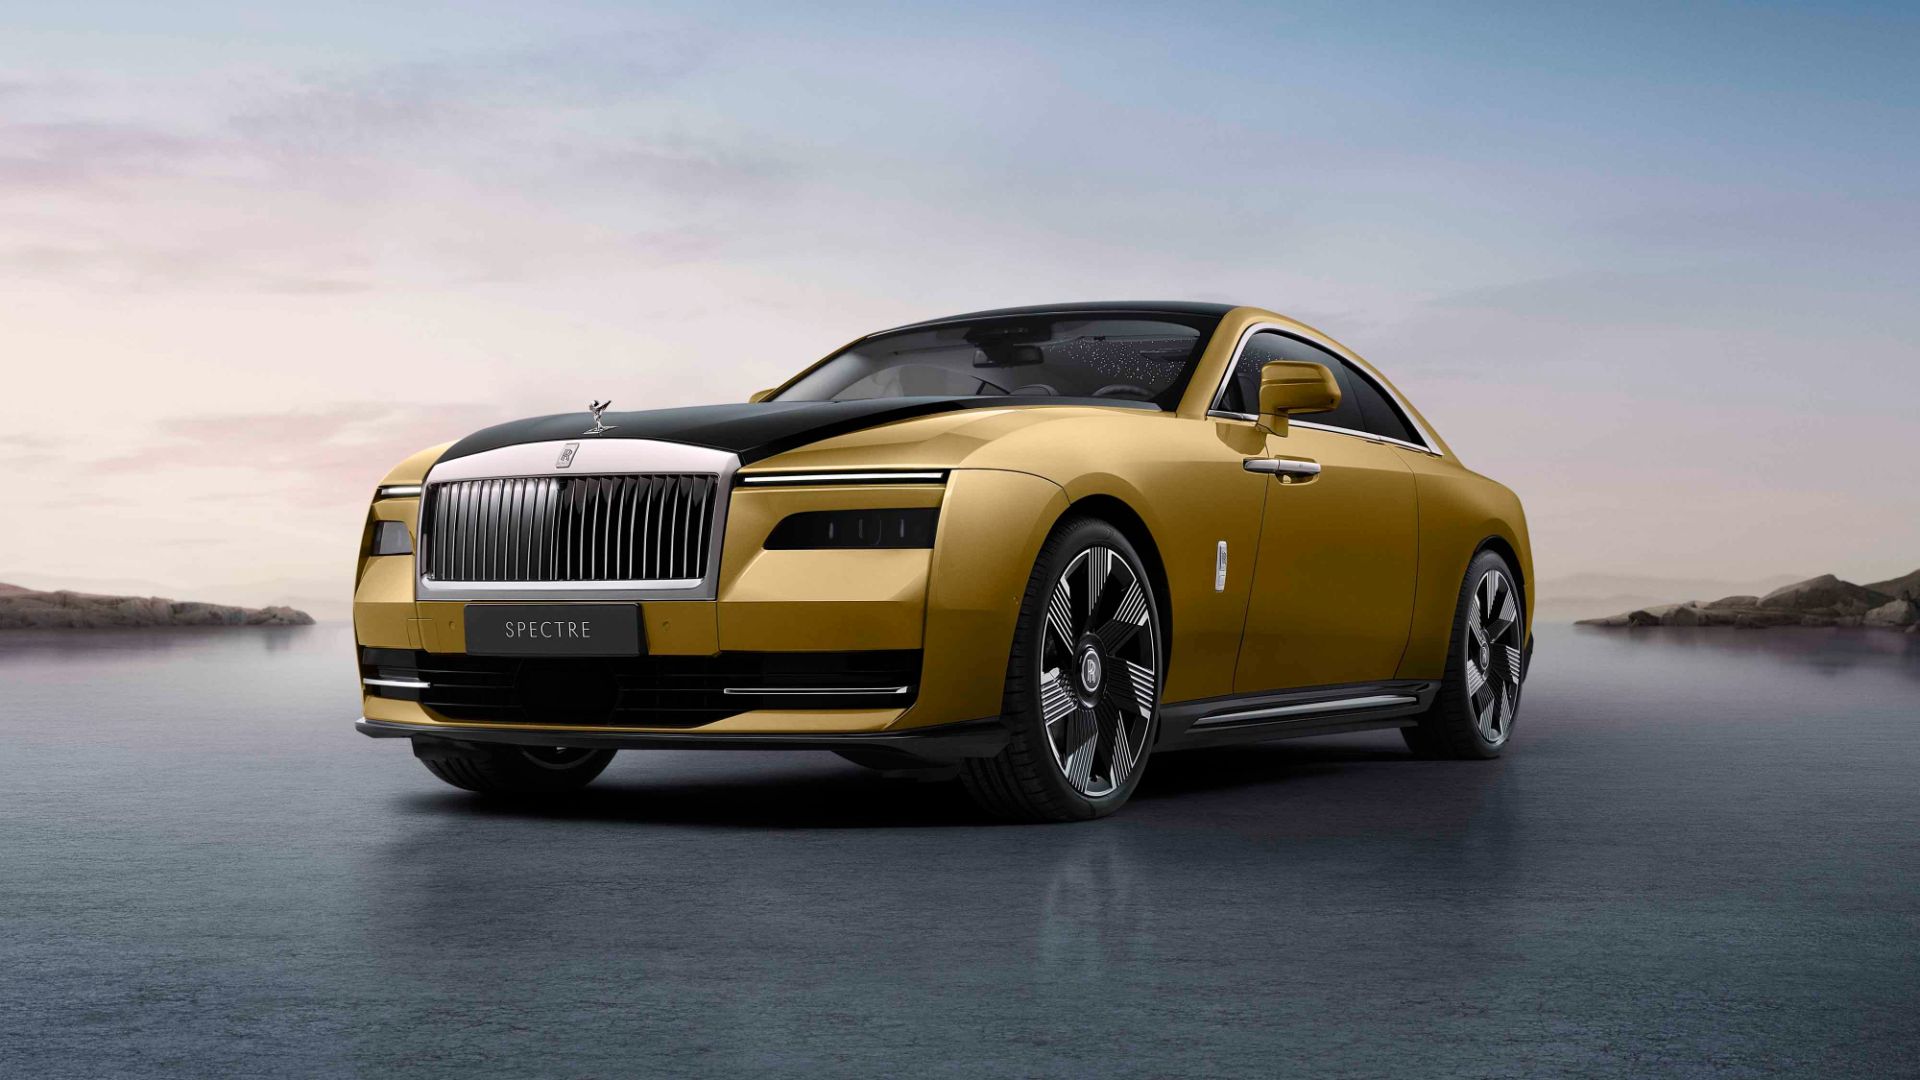 The new RollsRoyce Wraith is the most luxurious electric car in the